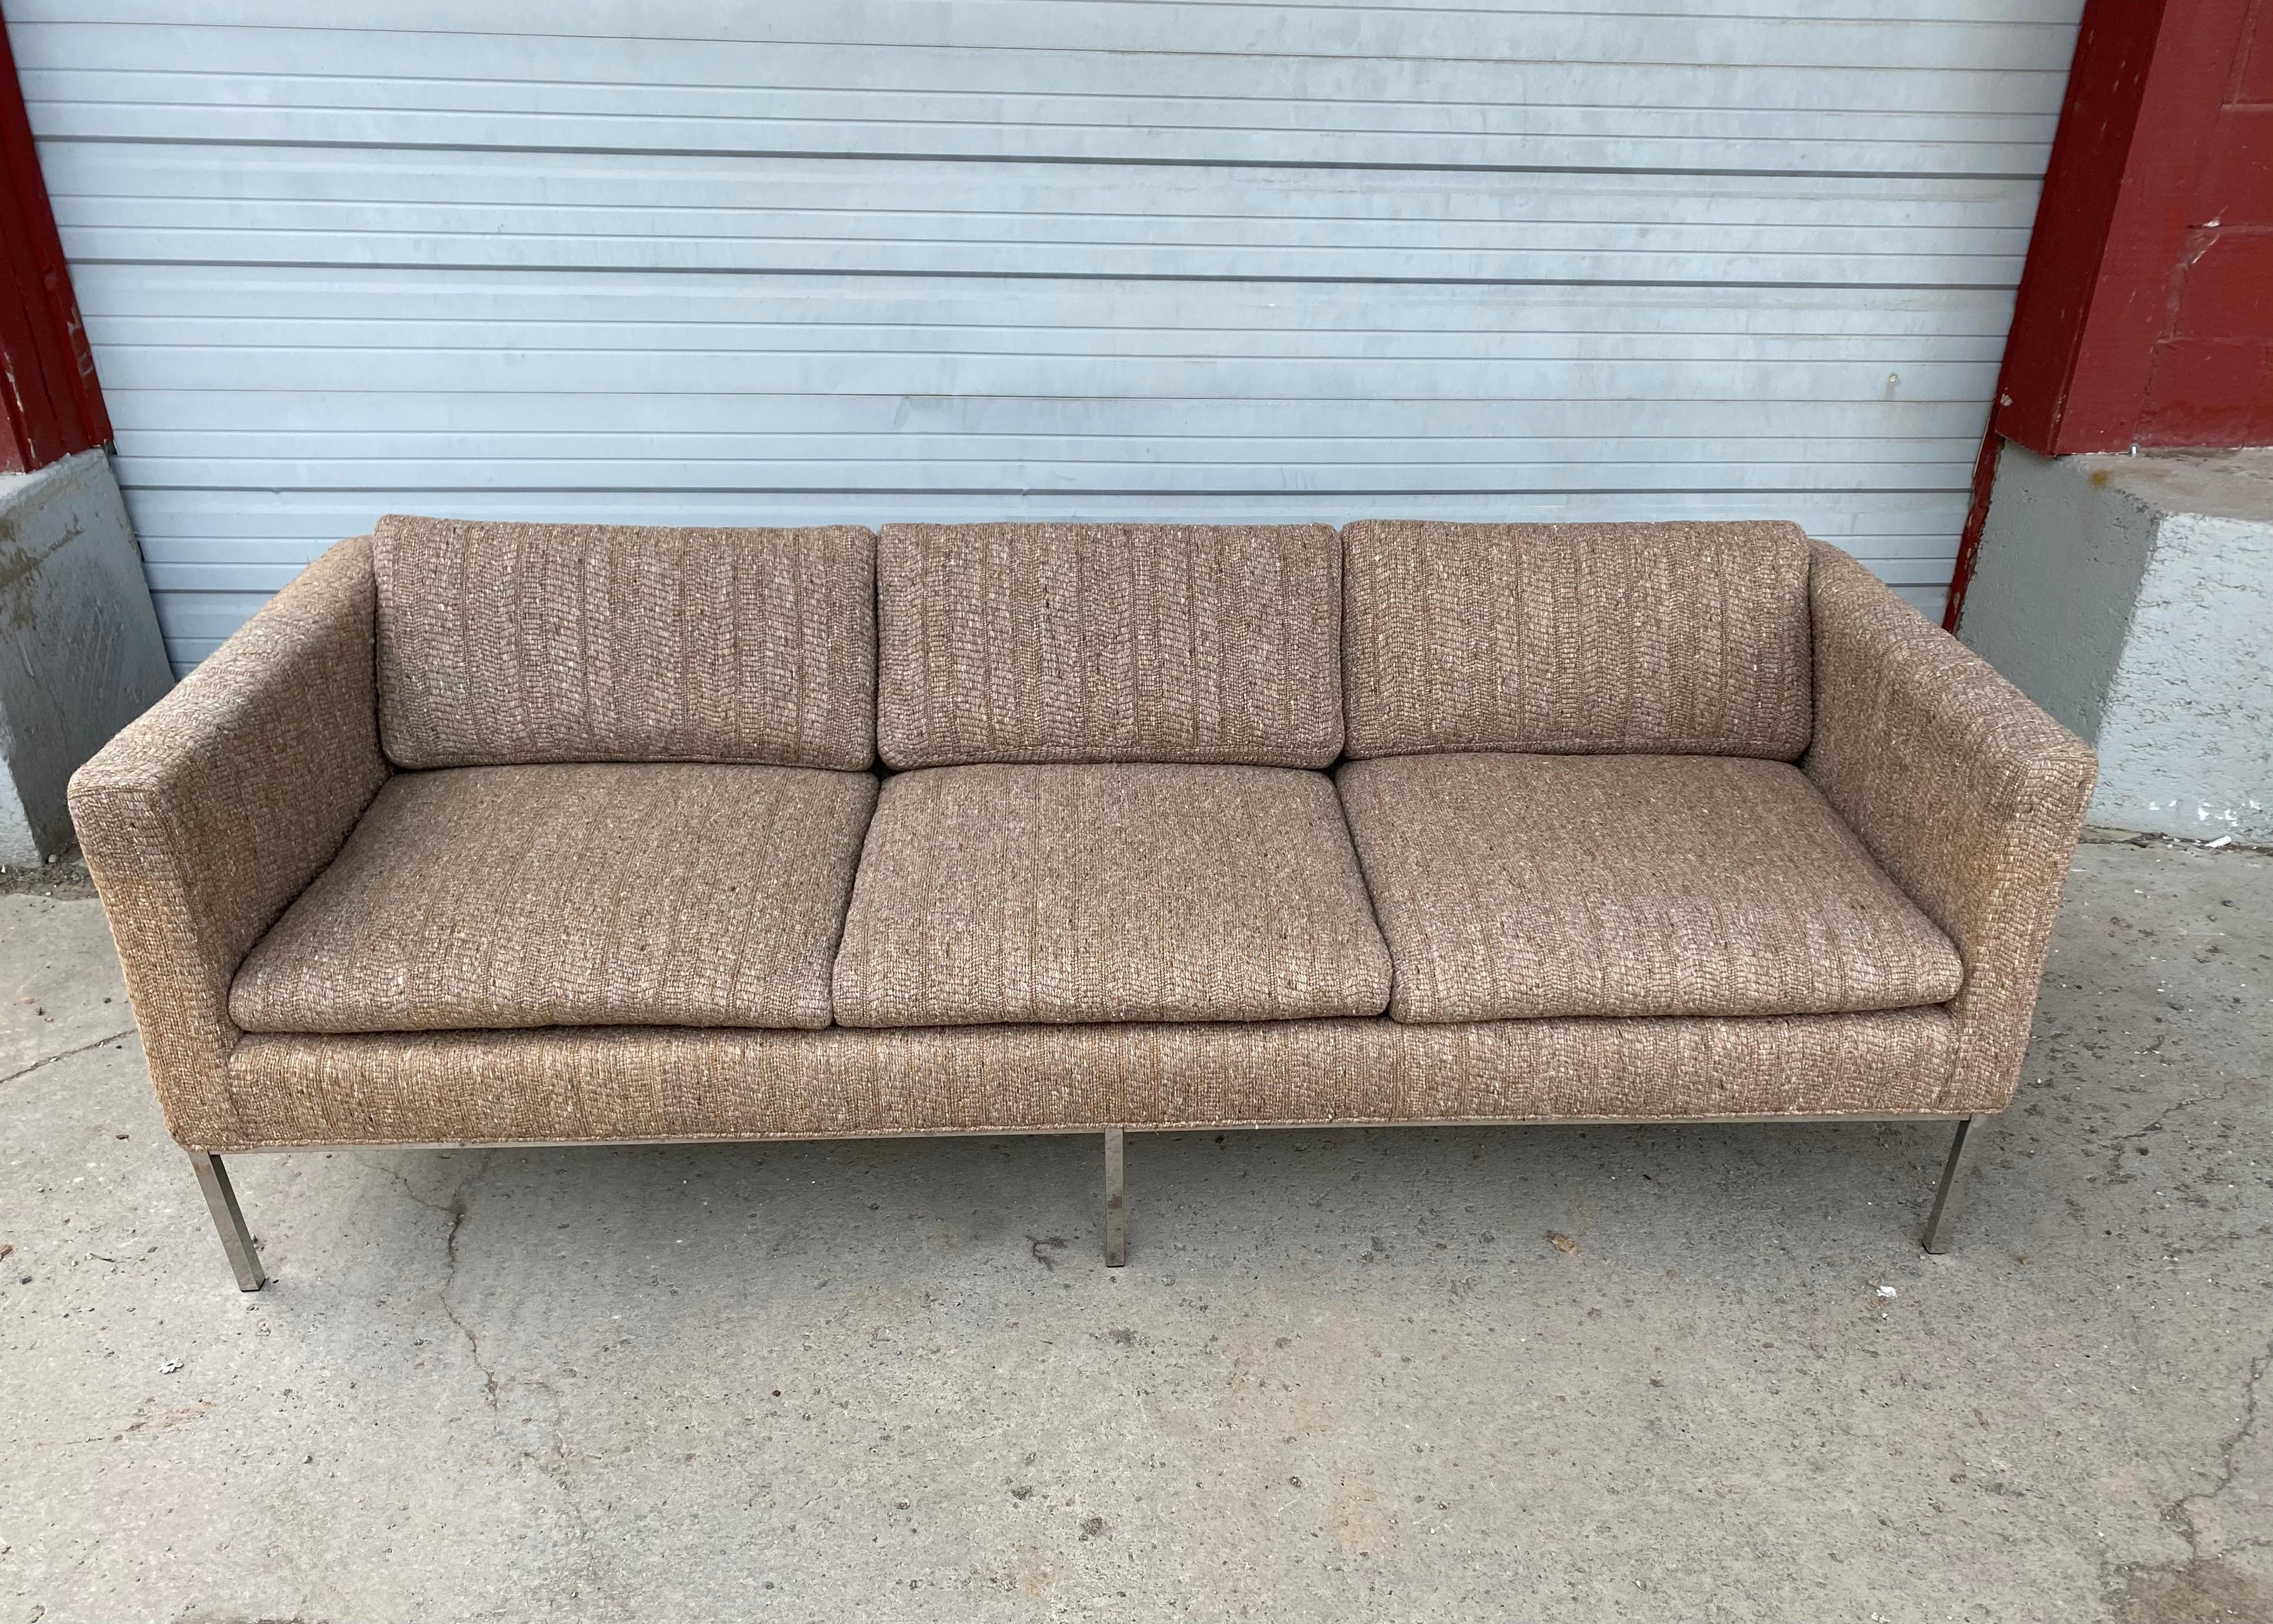 Milo Baughman Attributed Chrome Three-Seat Sofa, Mid-Century Modern In Good Condition For Sale In Buffalo, NY